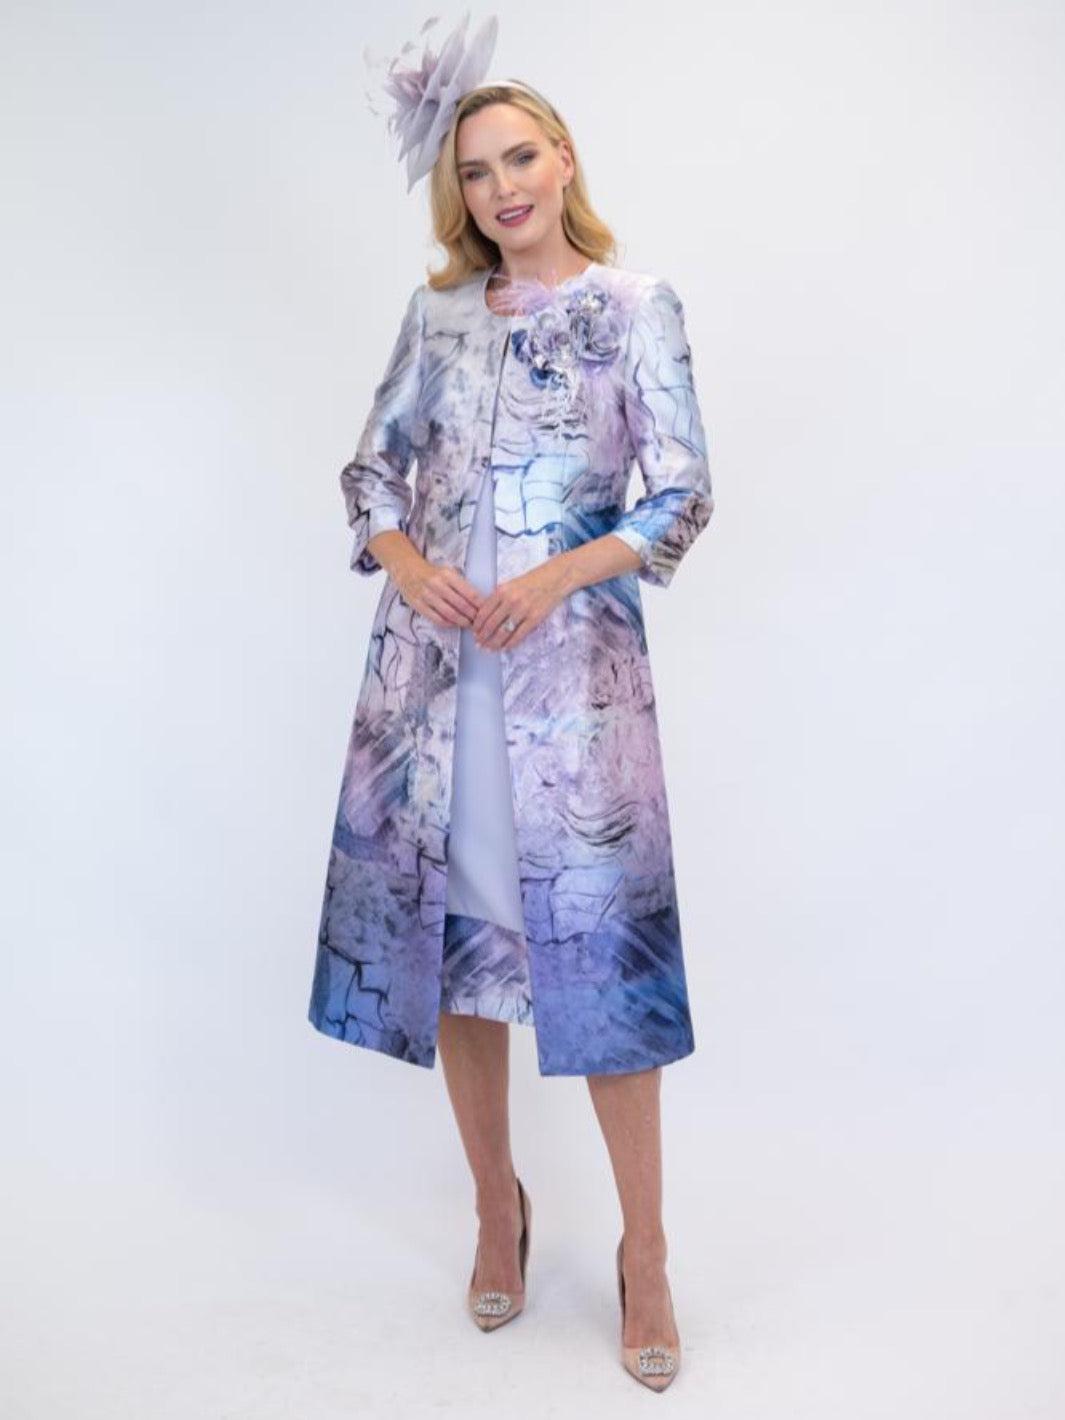 Ophelia Melita Gina Dress/Coat in Lilac-Mother of the bride- mother of the groom -Nicola Ross